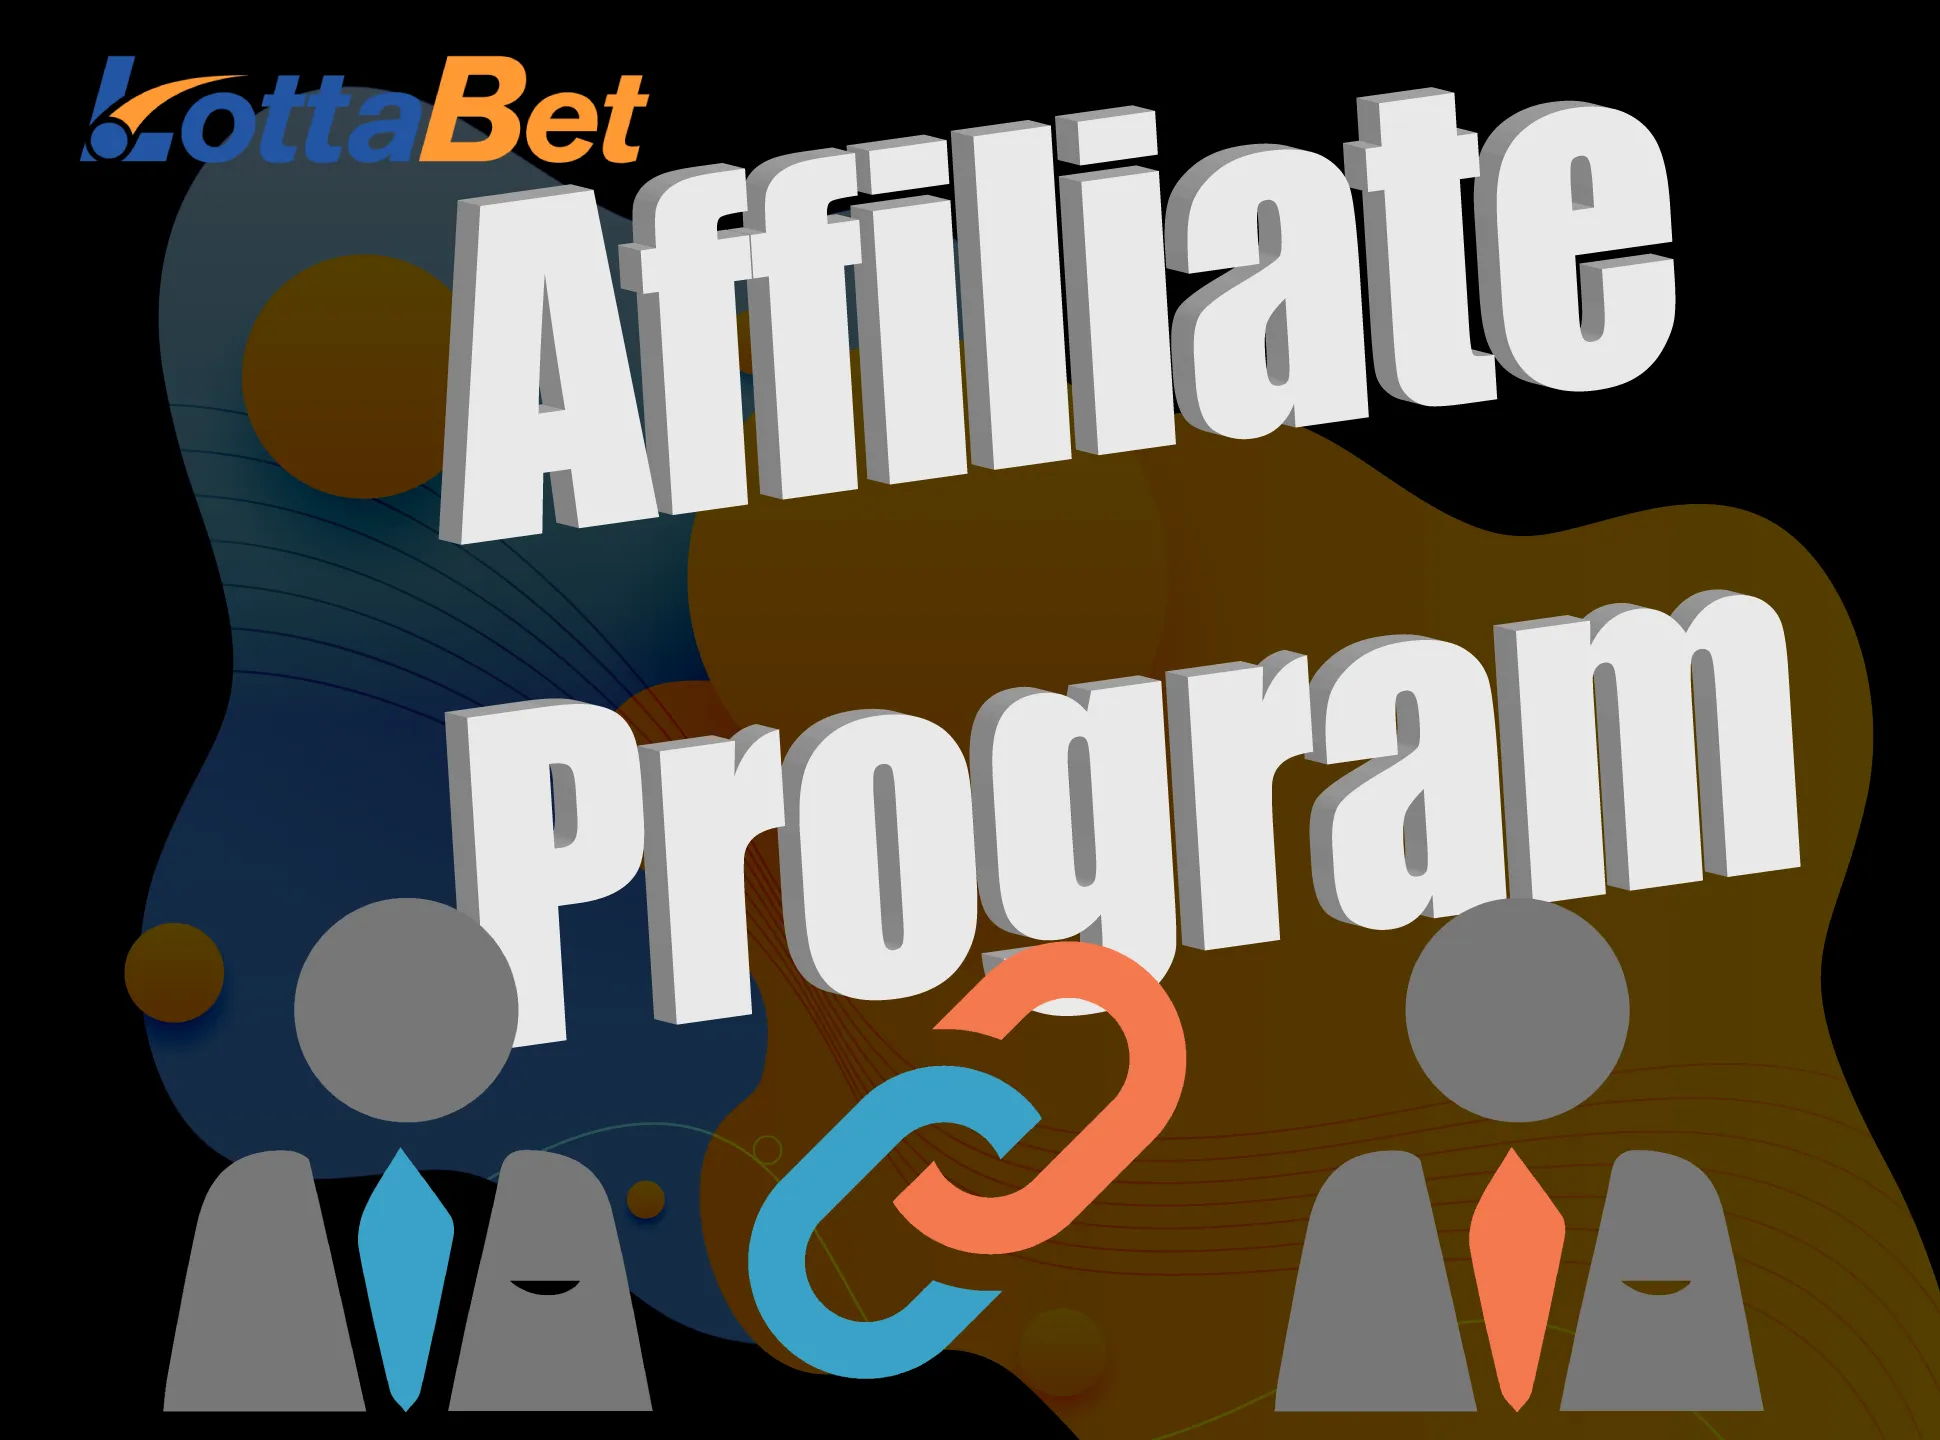 Join the Lottabet affiliate program to get additional benefits.